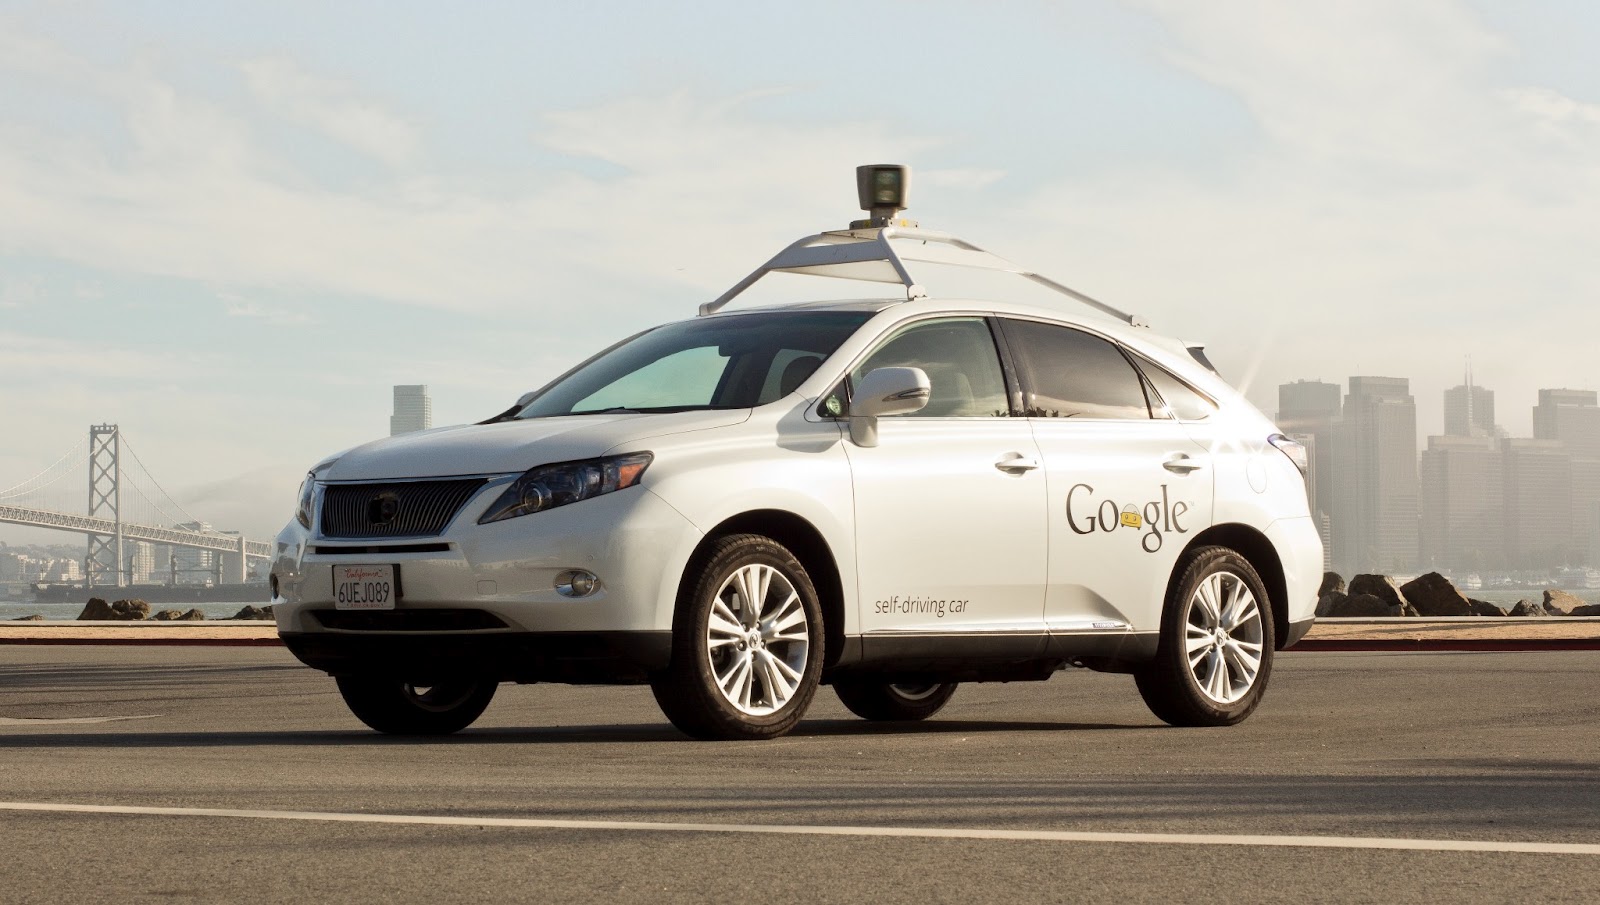 Ontario new test site for self driving vehicles, Youngs Insurance, Ontario